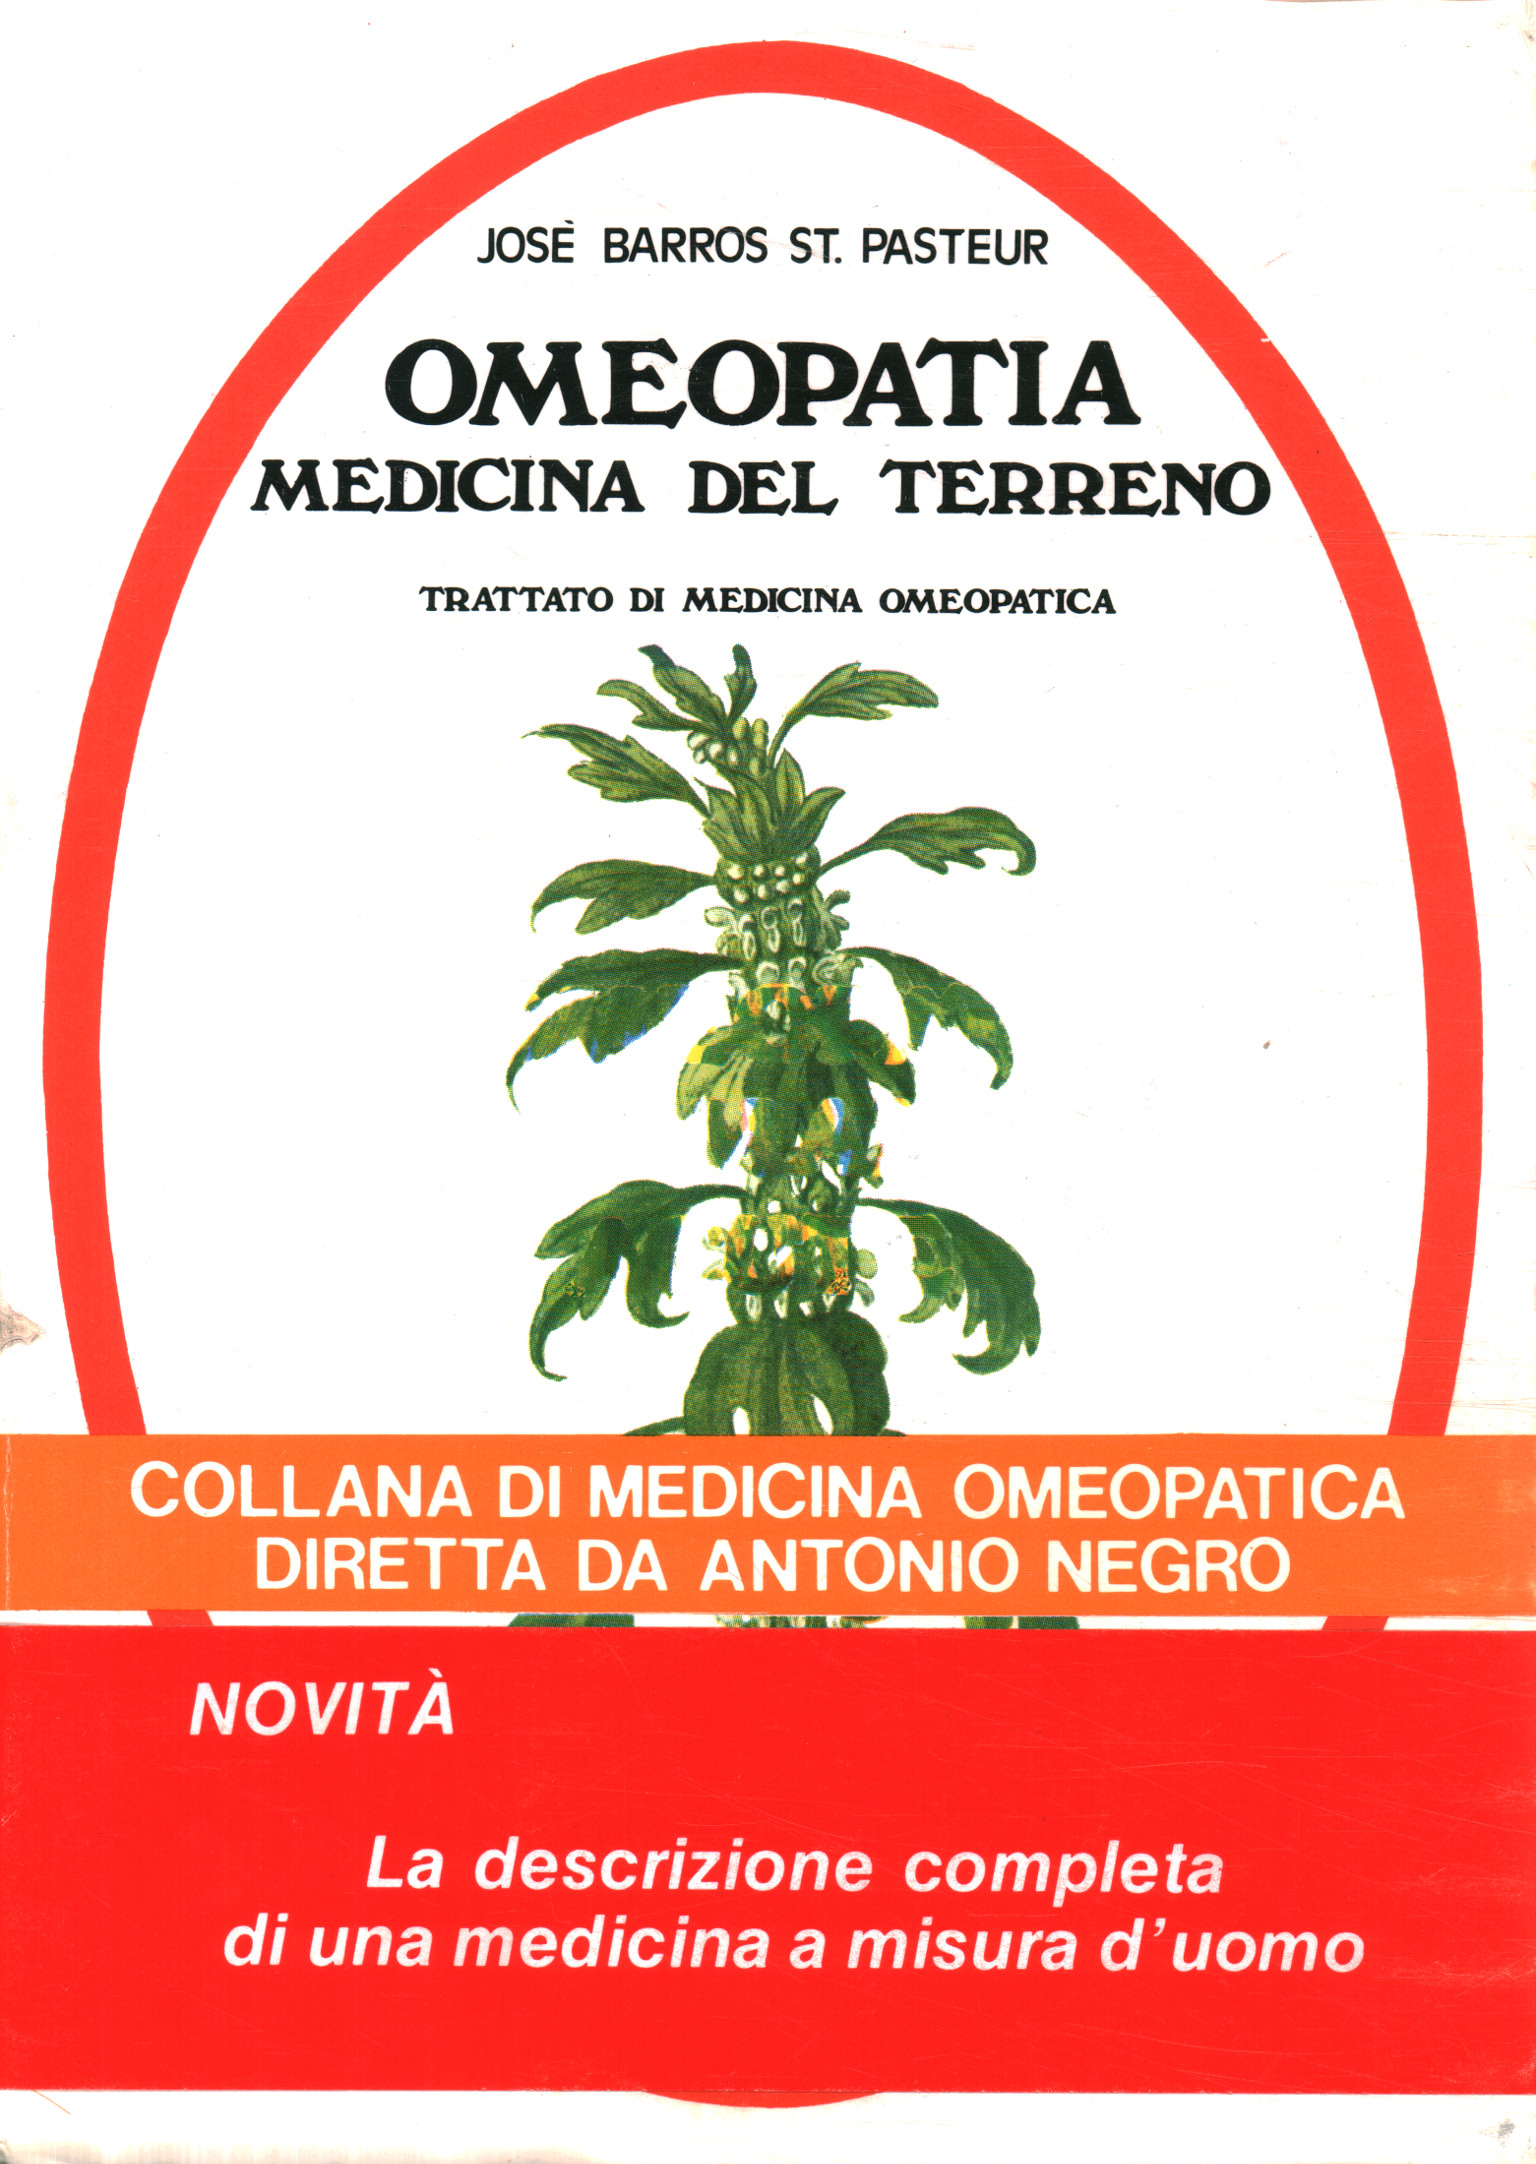 Homeopathic soil medicine